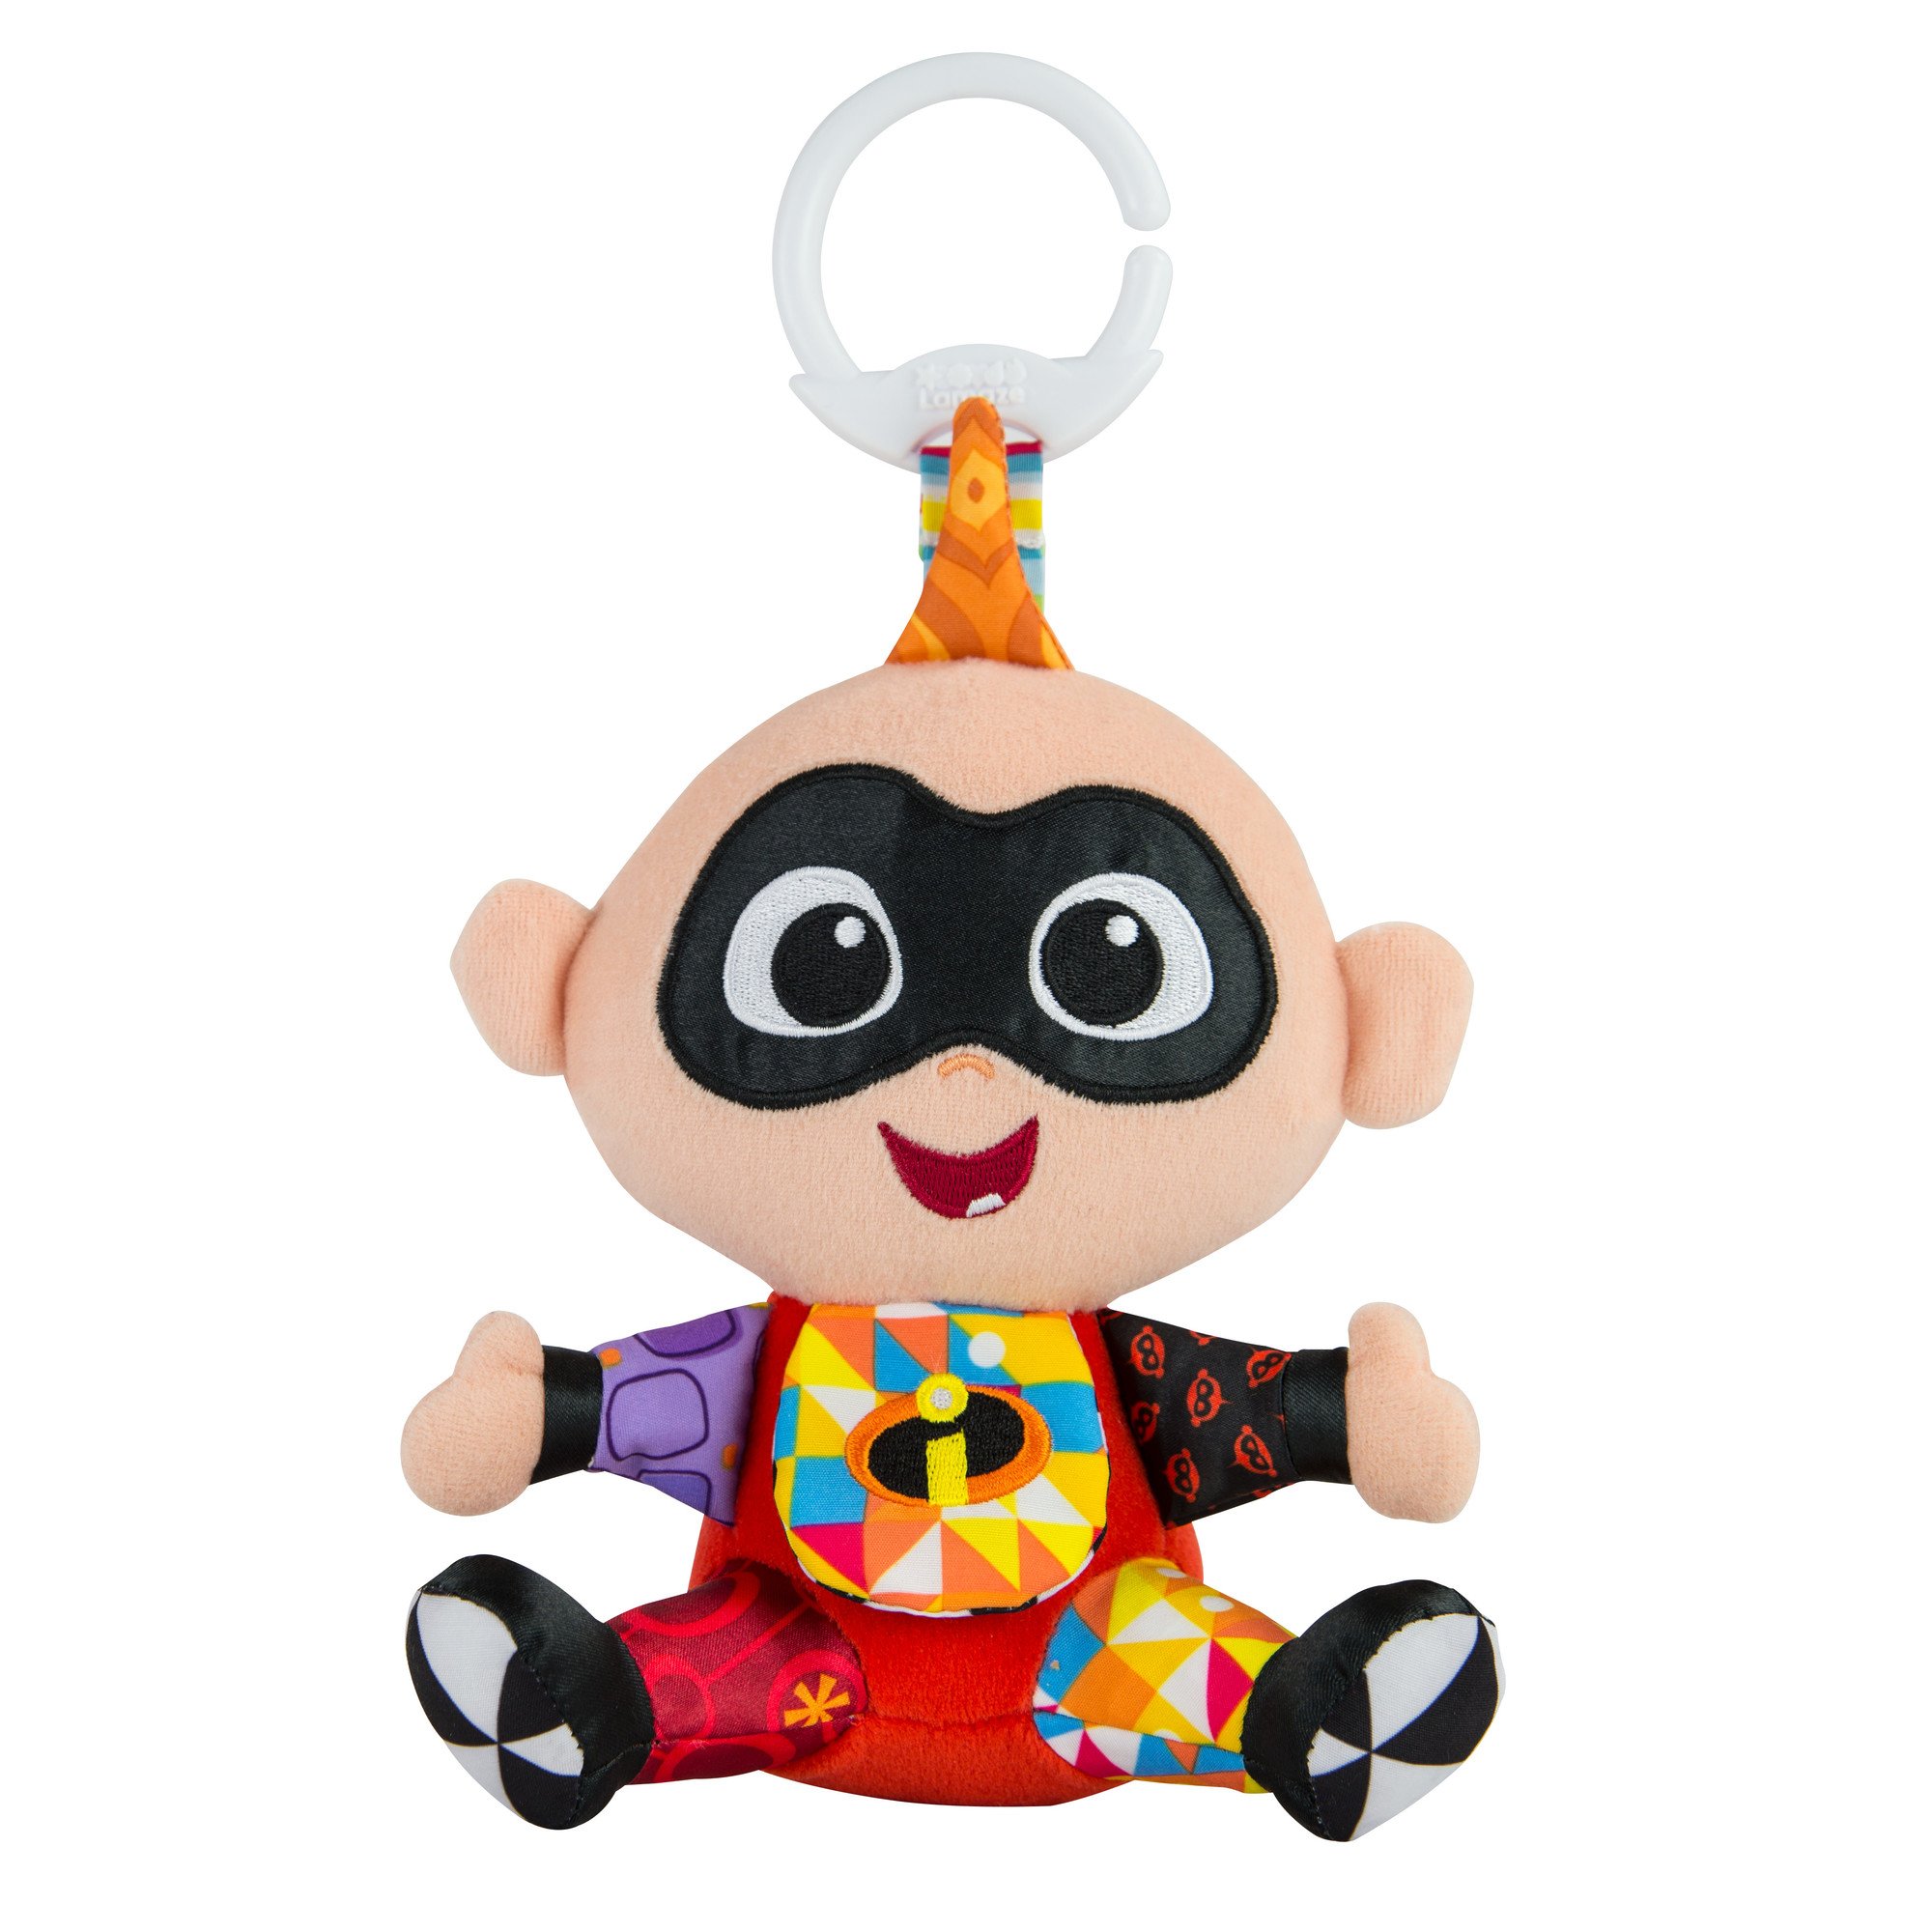 LAMAZE L27250 and Disney Incredibles Clip & Go Jack, Druck, beige, 1 Count (Pack of 1)